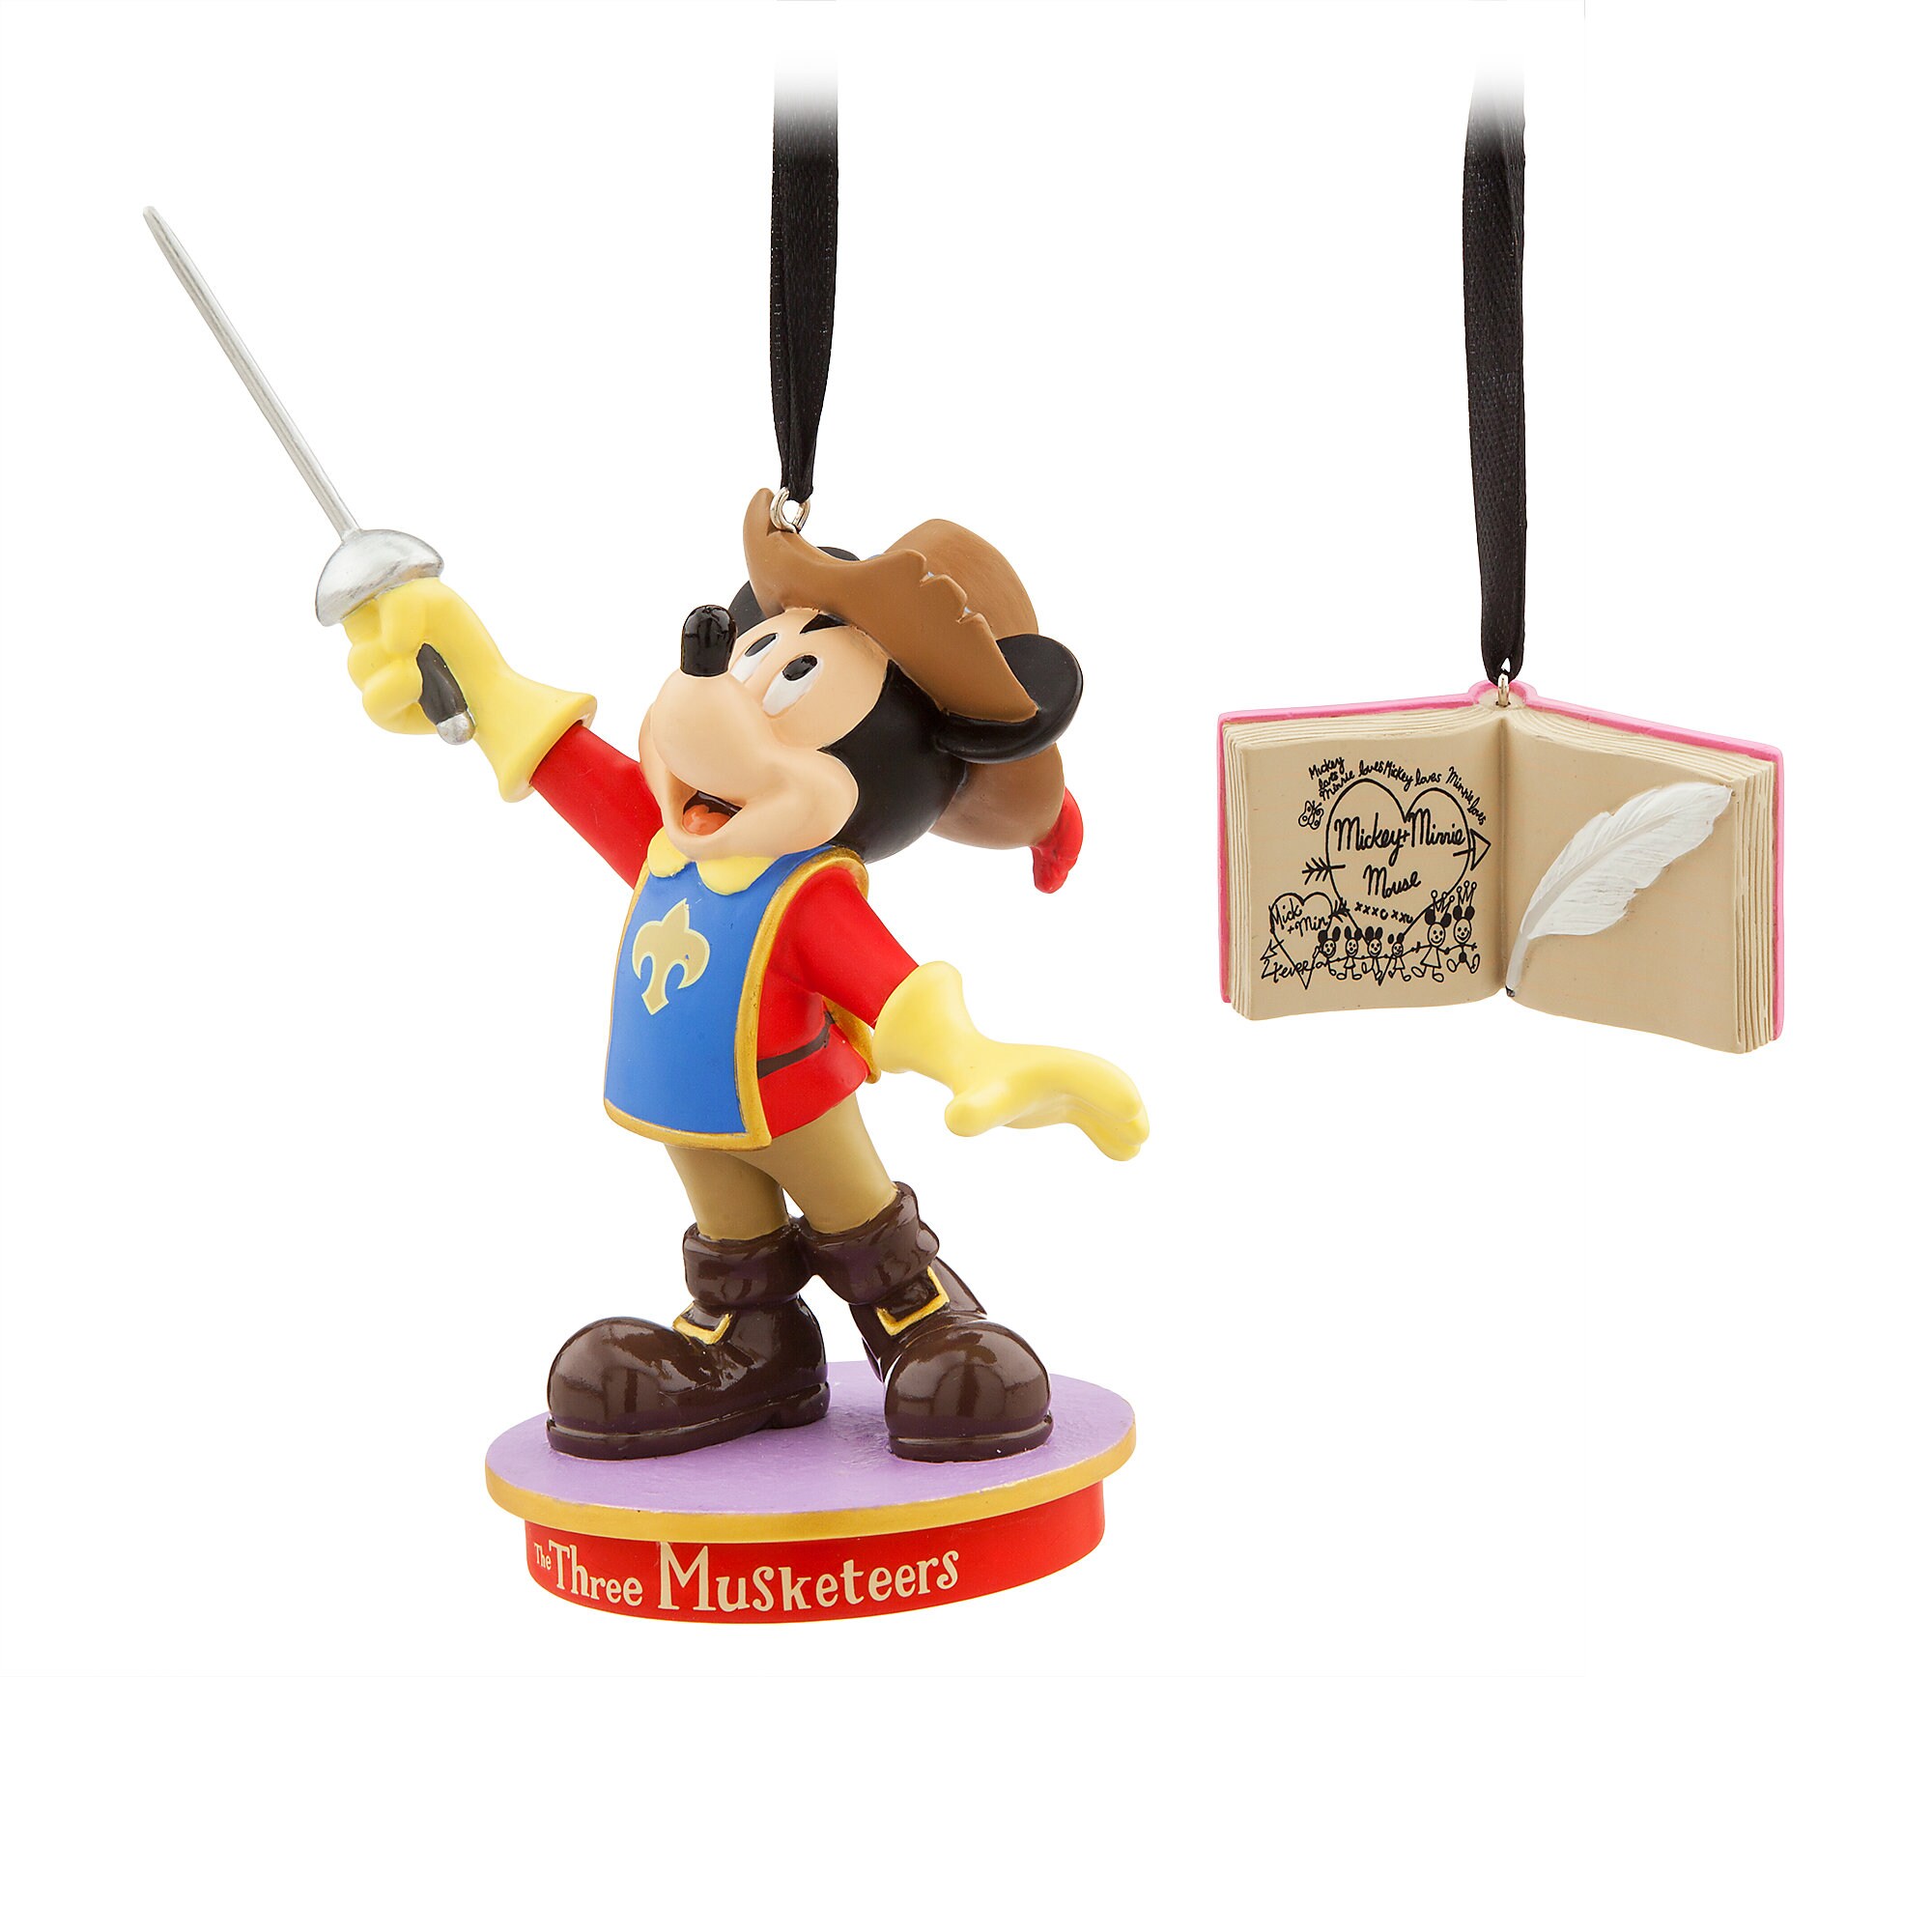 Mickey Mouse Through the Years Sketchbook Ornament Set - The Three Musketeers - November - Limited Release